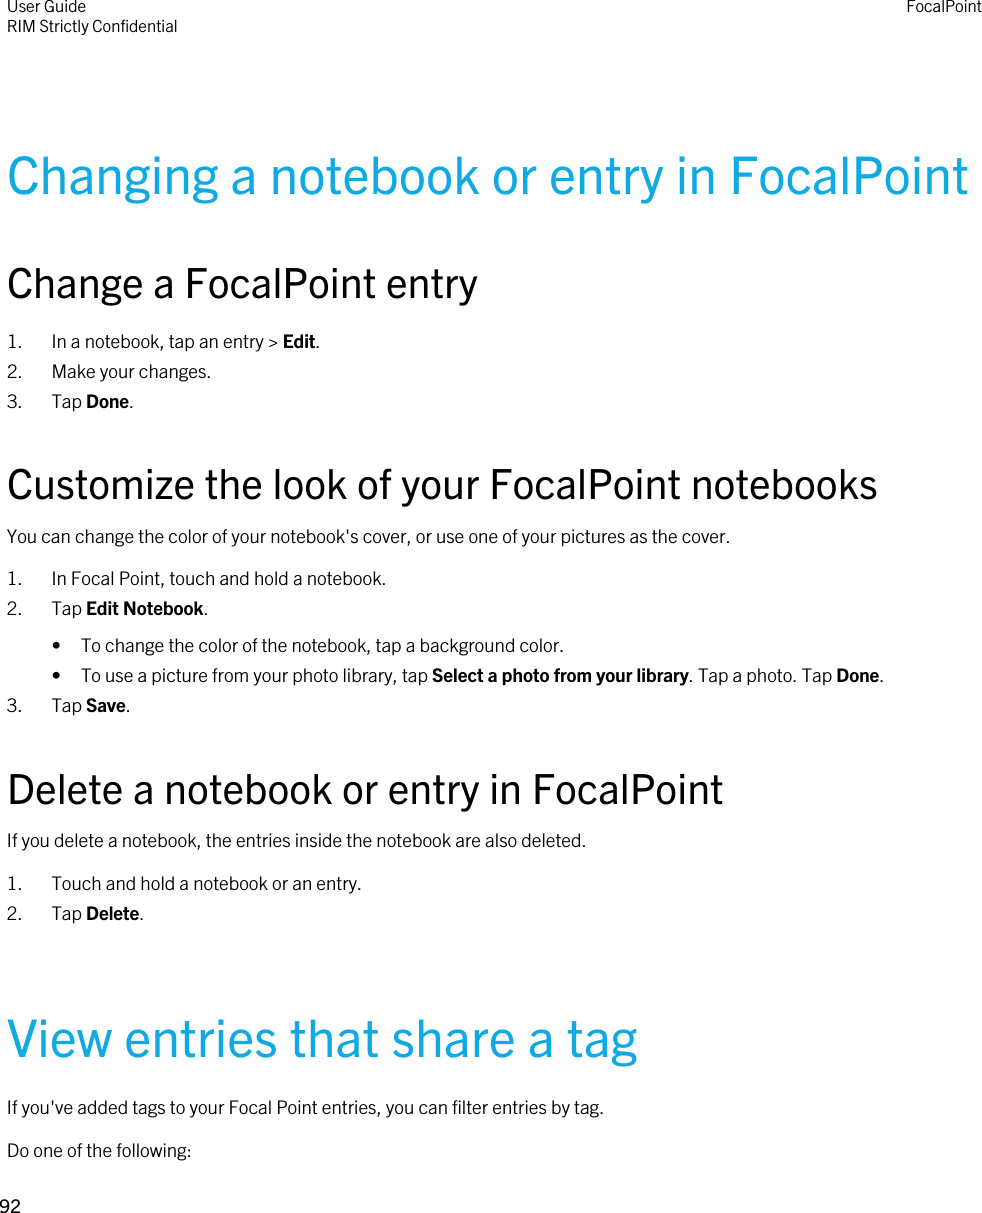 Changing a notebook or entry in FocalPointChange a FocalPoint entry1. In a notebook, tap an entry &gt; Edit.2. Make your changes.3. Tap Done.Customize the look of your FocalPoint notebooksYou can change the color of your notebook&apos;s cover, or use one of your pictures as the cover.1. In Focal Point, touch and hold a notebook.2. Tap Edit Notebook.• To change the color of the notebook, tap a background color.• To use a picture from your photo library, tap Select a photo from your library. Tap a photo. Tap Done.3. Tap Save.Delete a notebook or entry in FocalPointIf you delete a notebook, the entries inside the notebook are also deleted.1. Touch and hold a notebook or an entry.2. Tap Delete.View entries that share a tagIf you&apos;ve added tags to your Focal Point entries, you can filter entries by tag.Do one of the following:User GuideRIM Strictly ConfidentialFocalPoint92 